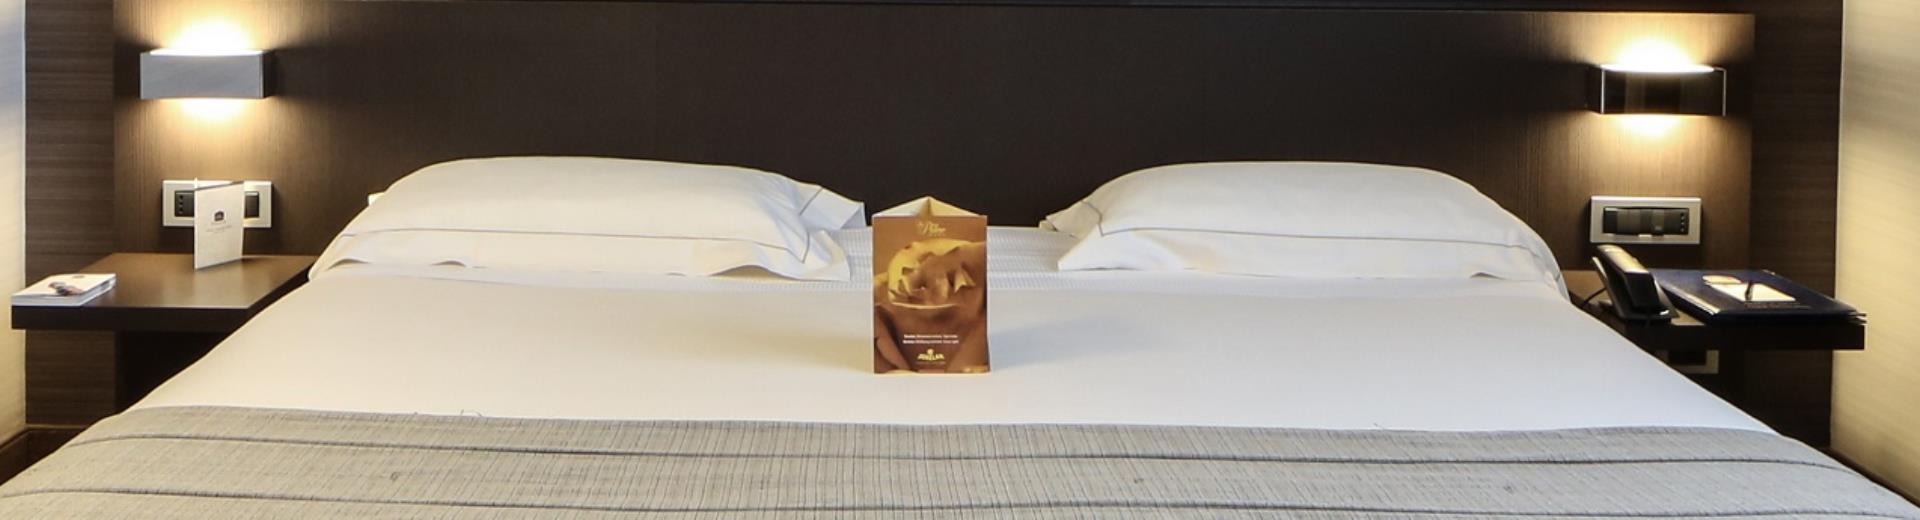 Stay near Milan at BW Plus Hotel Monza e Brianza Palace in comfort rooms